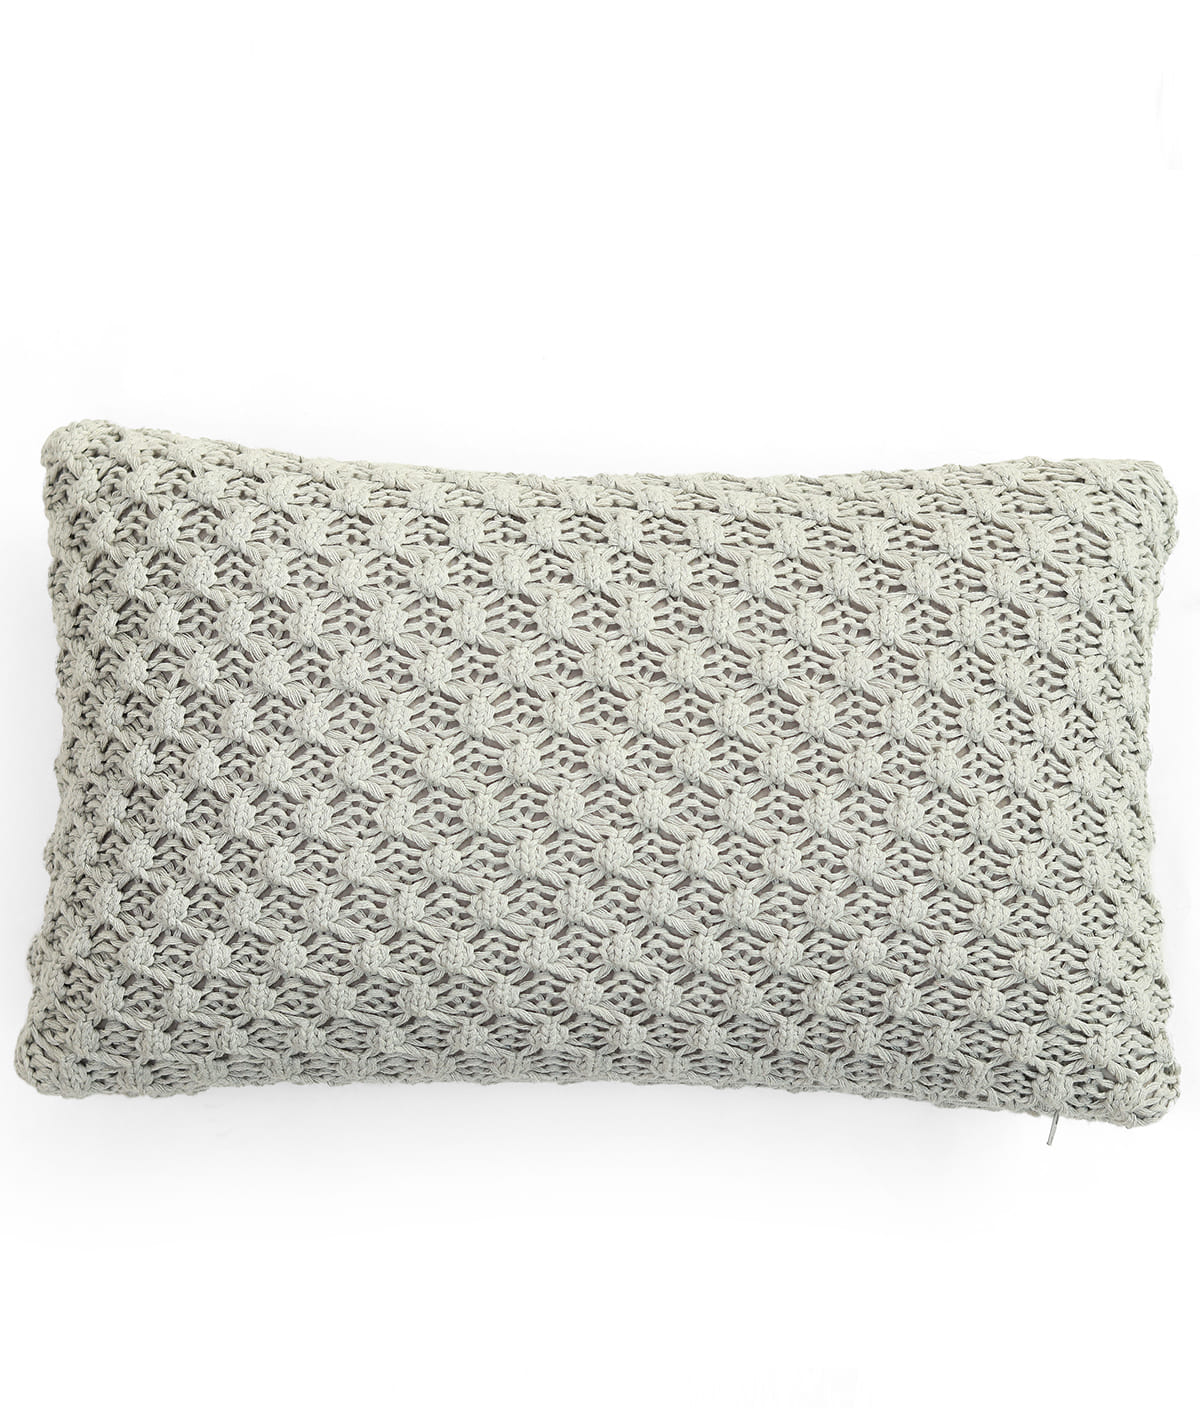 Popcorn Knit Vanilla Grey Melange Cotton Knitted Decorative 12 X 20 Inches Cushion Cover